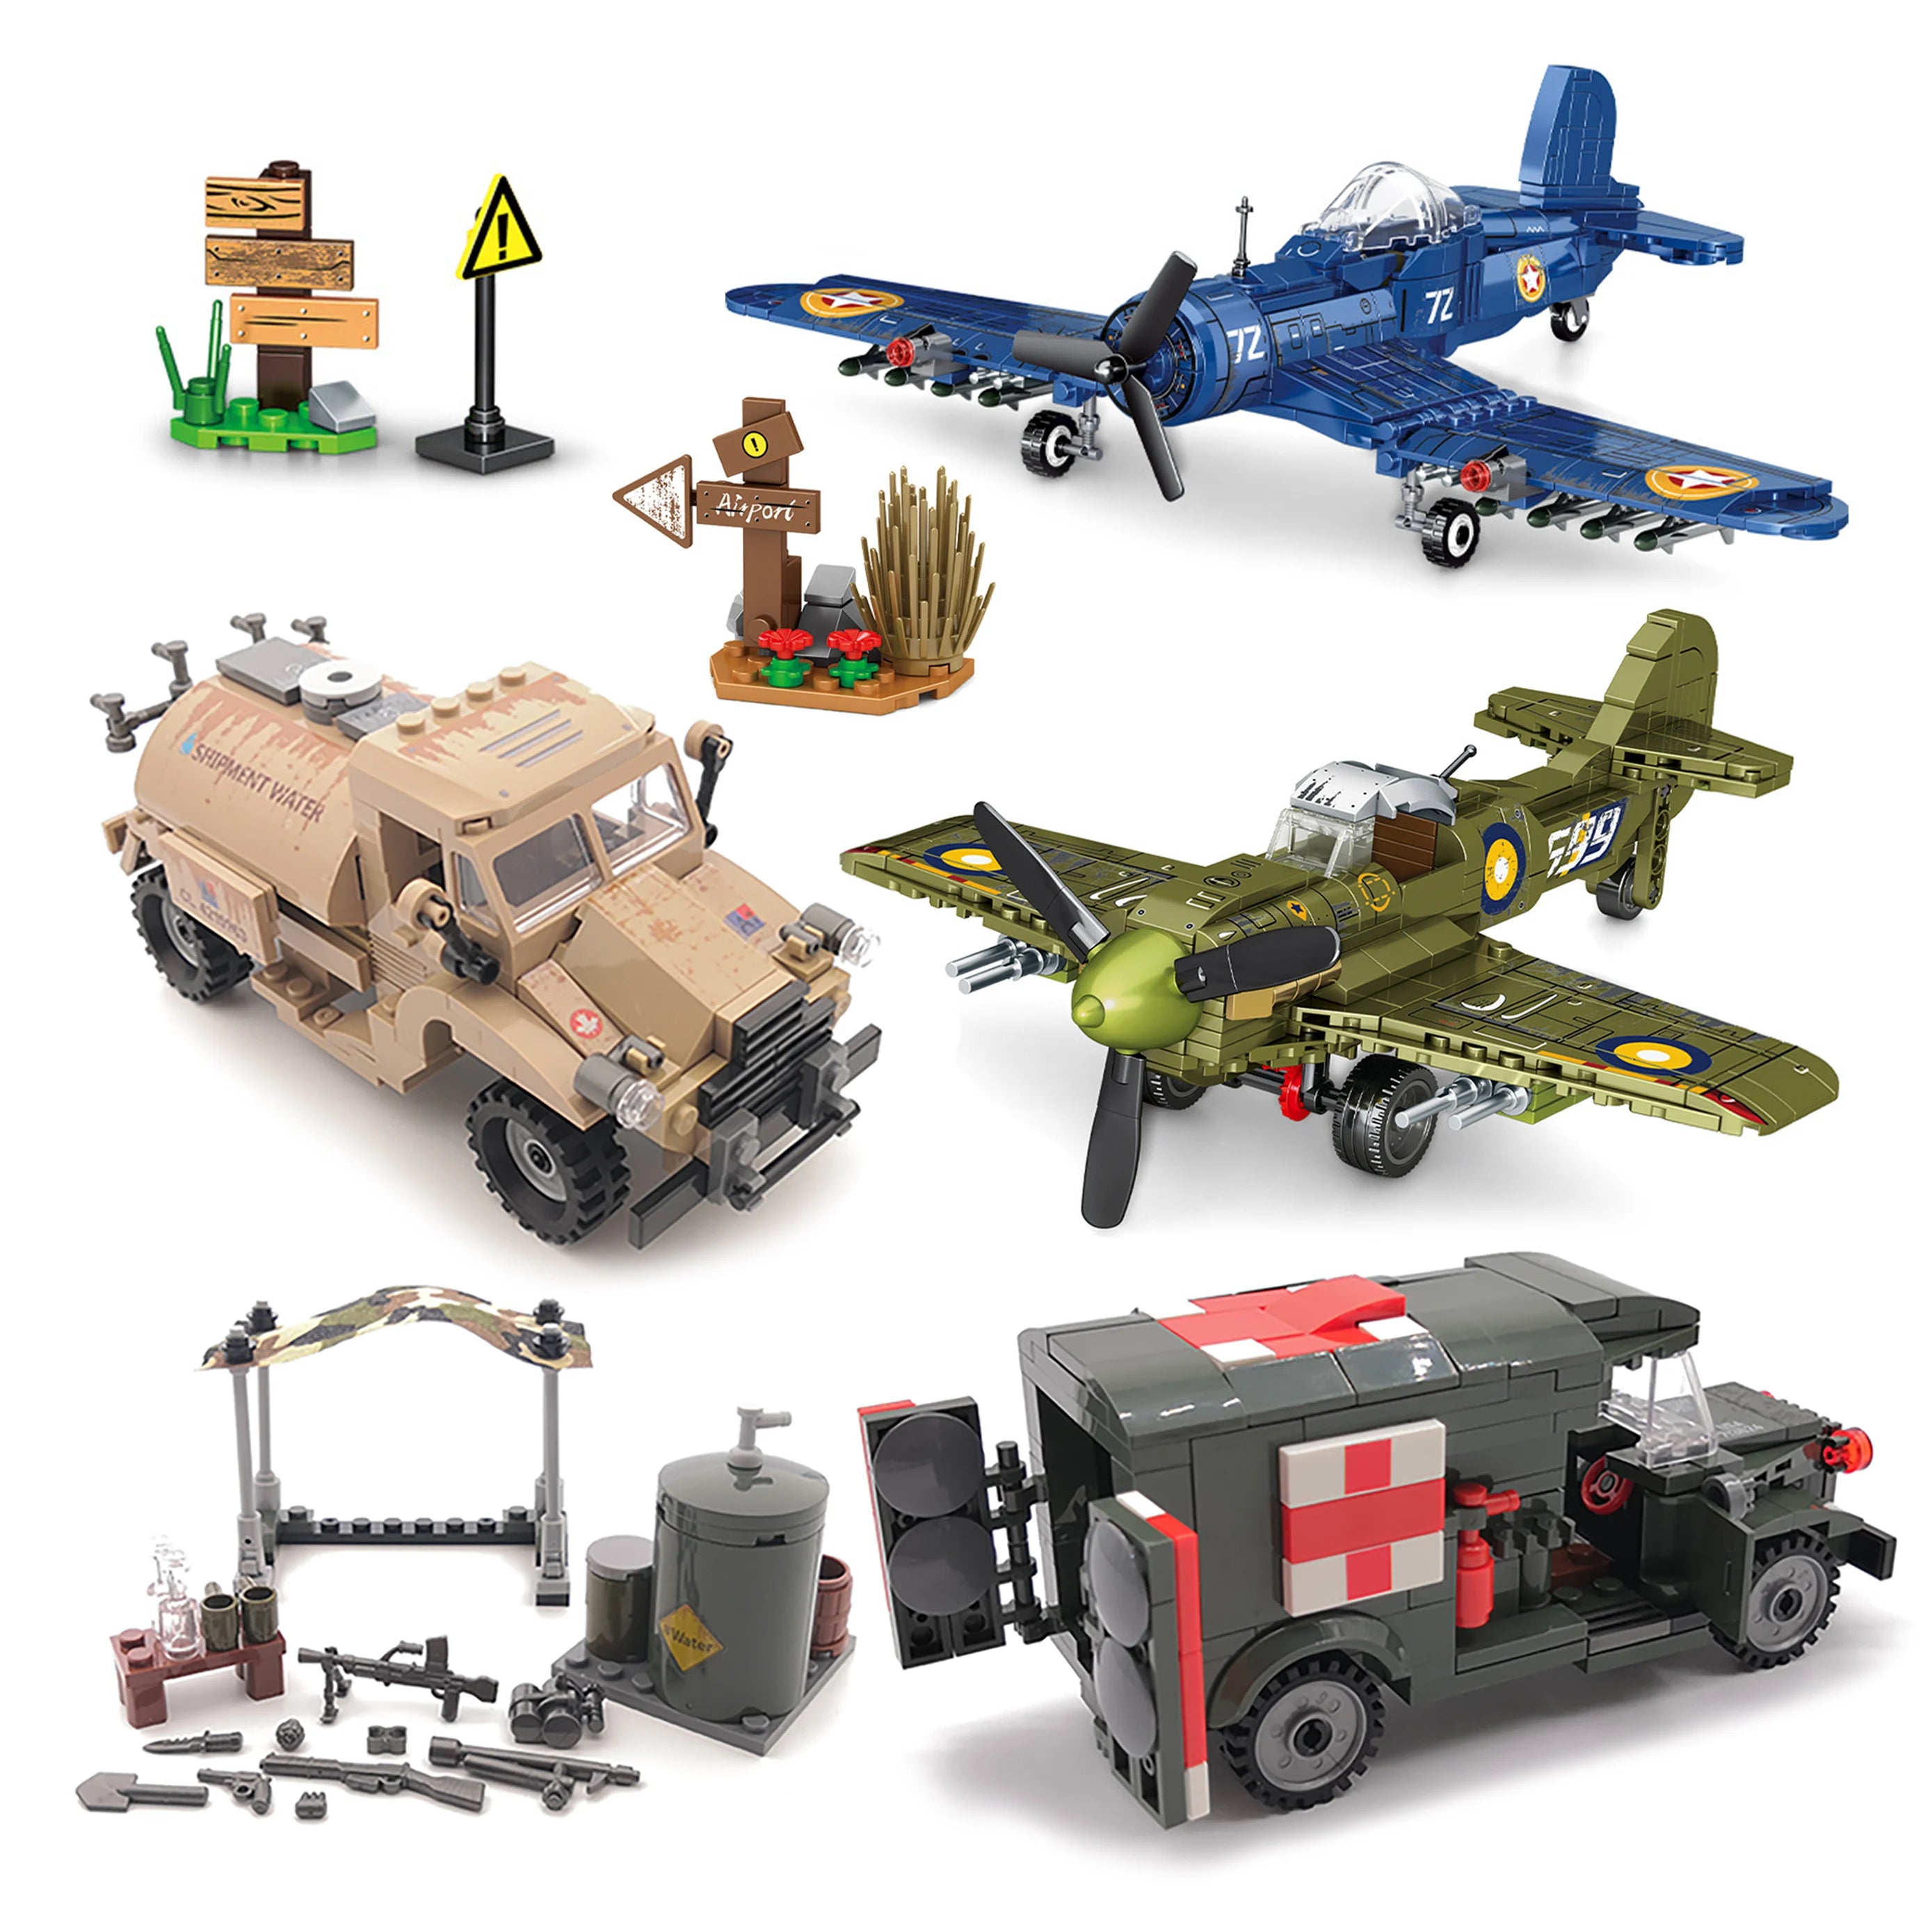 Beginners Military Brick Model Sets - Explore the World of Military Vehicles